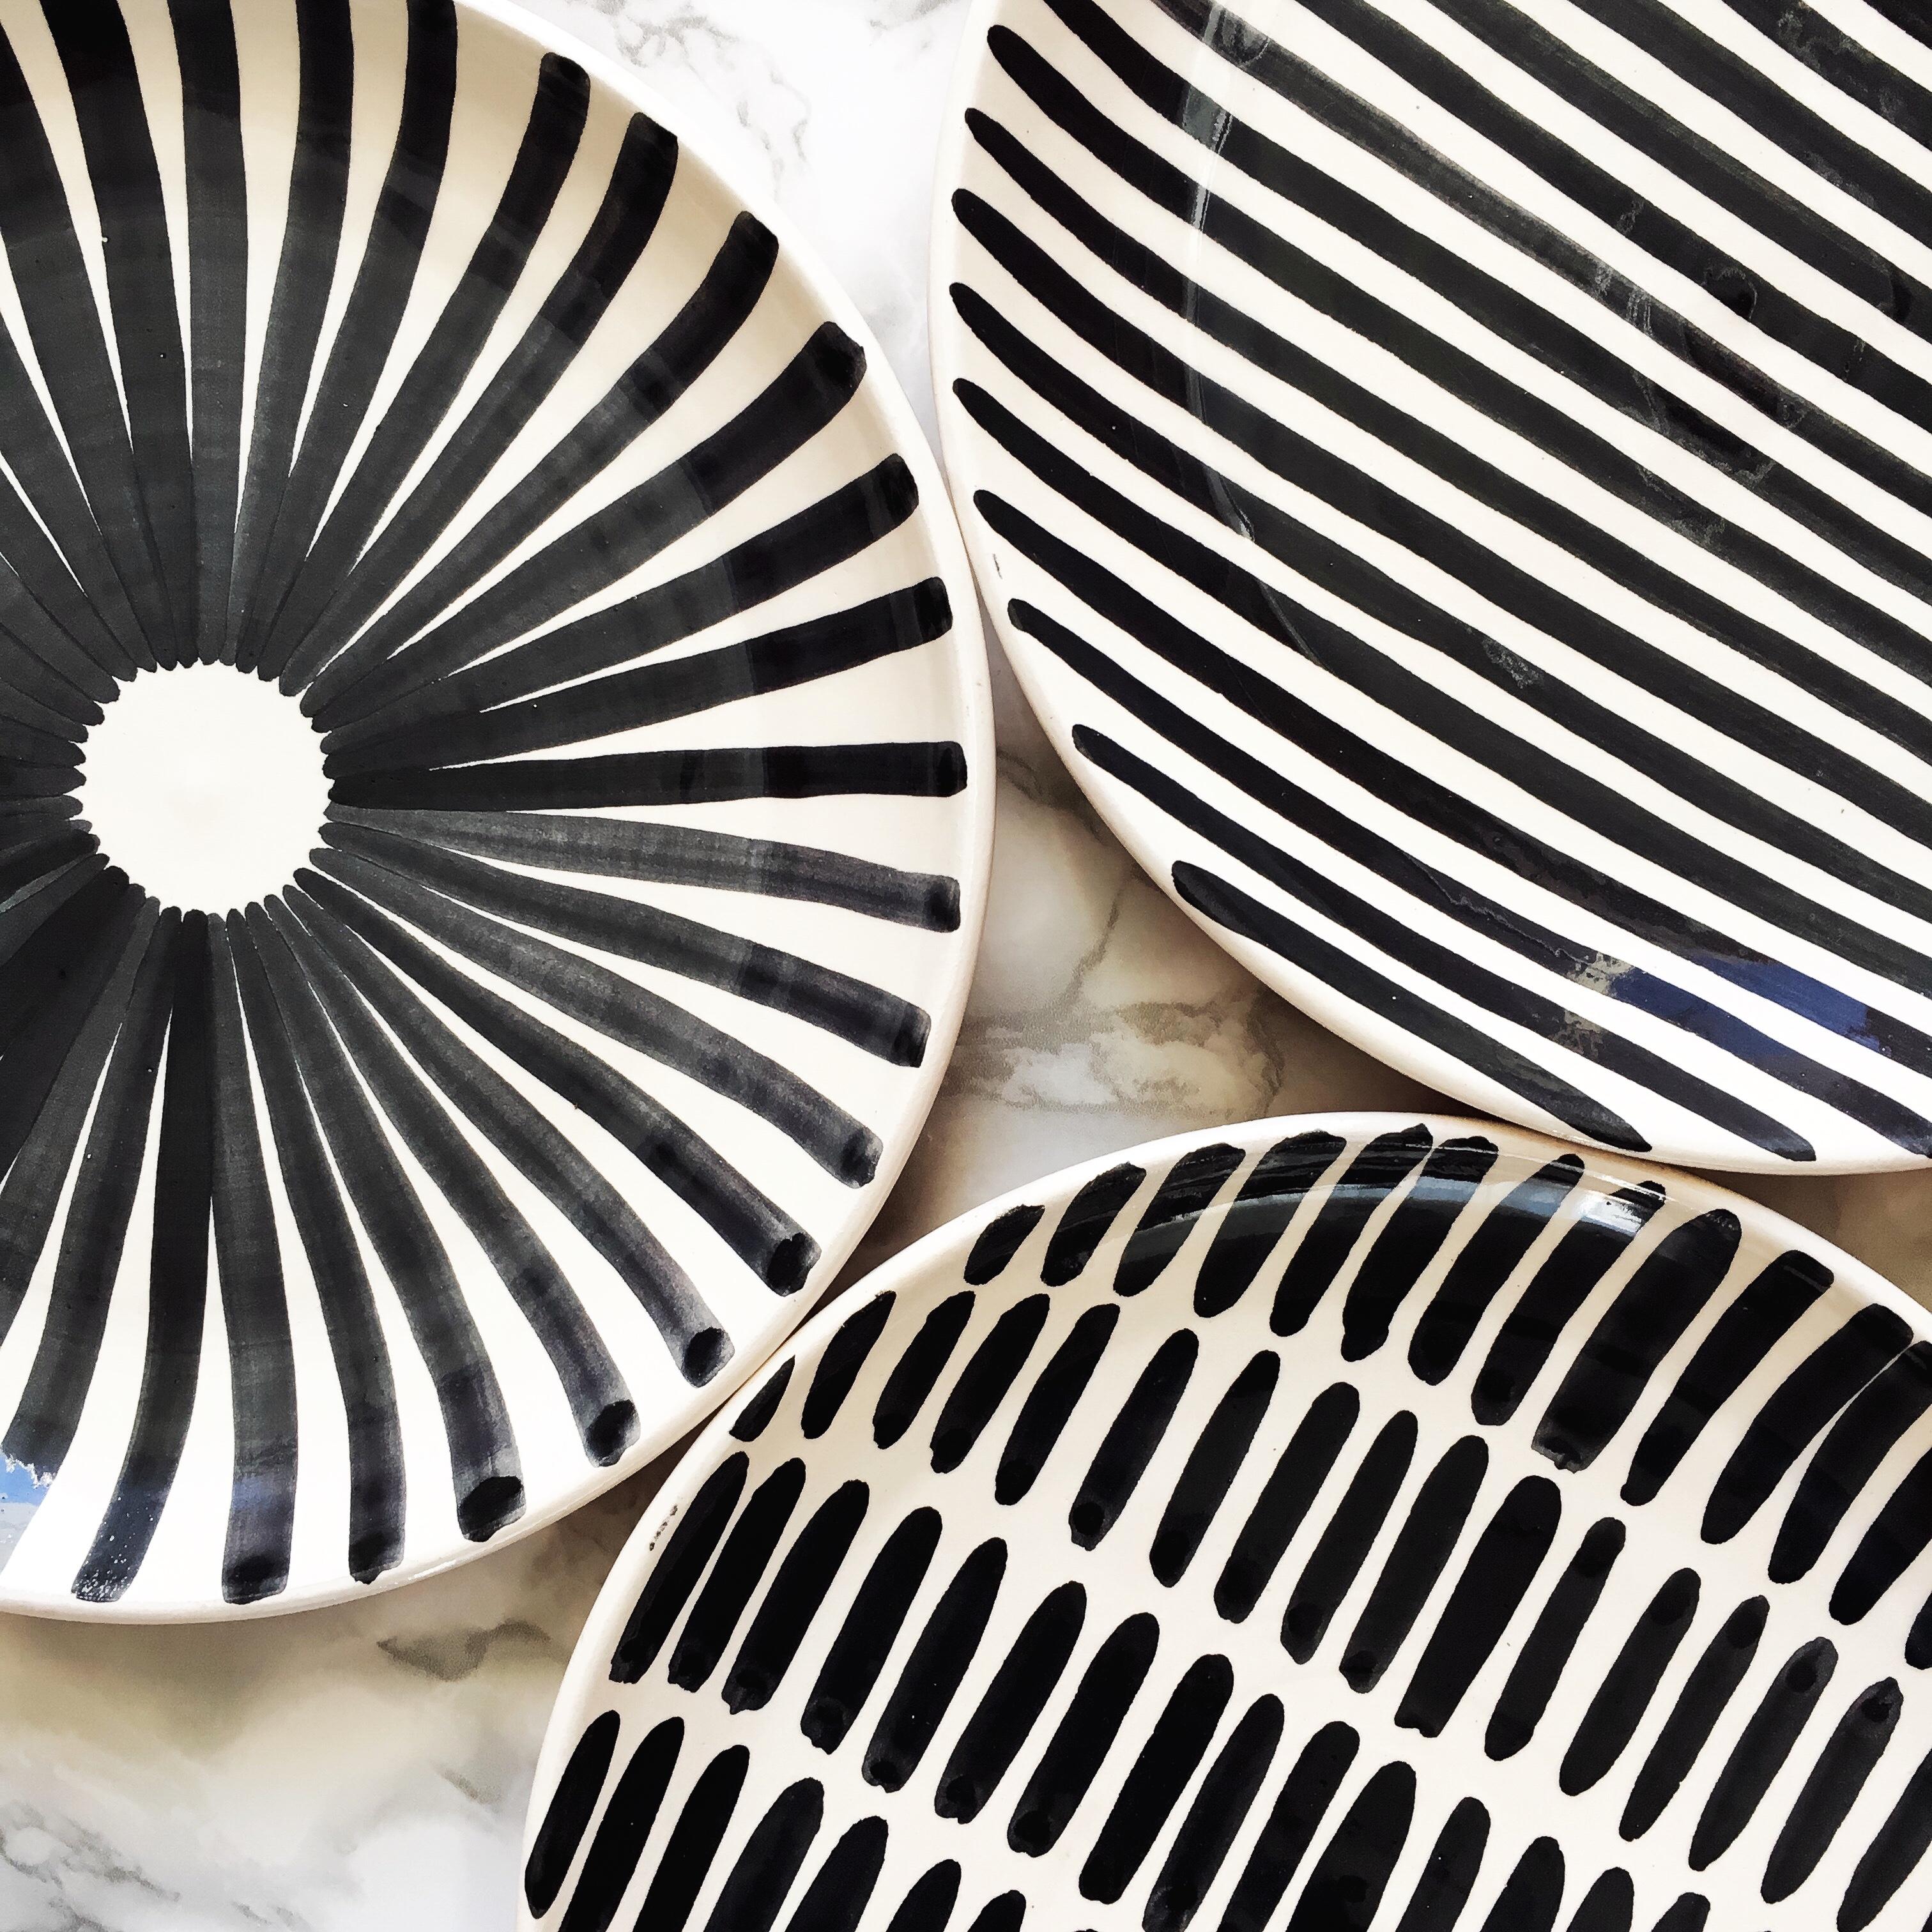 Hand-Crafted Handmade Black and White Ceramic Dash Pattern Saucer, in Stock